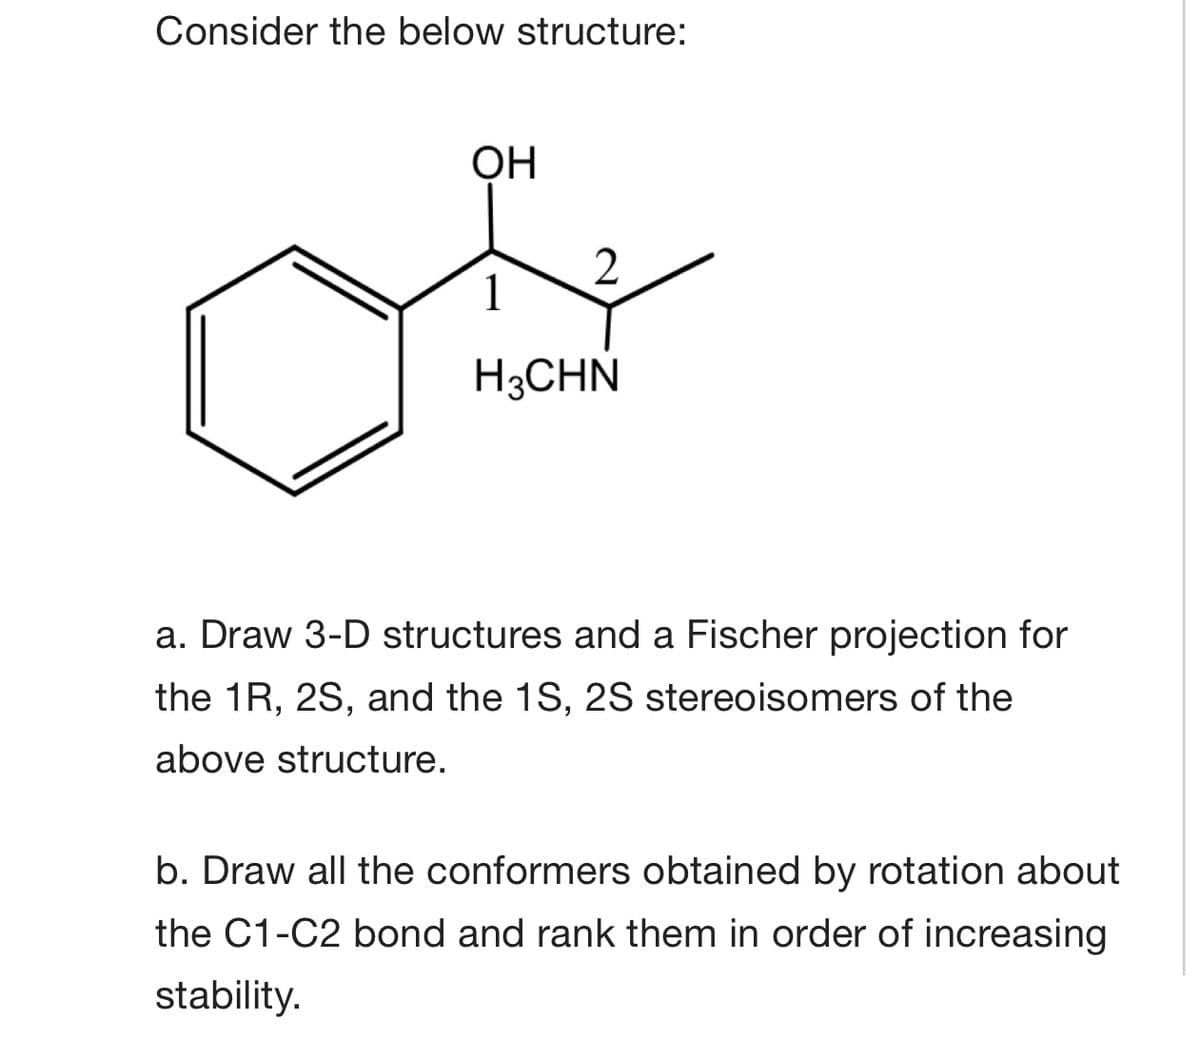 Consider the below structure:
ОН
1
H3CHN
a. Draw 3-D structures and a Fischer projection for
the 1R, 2S, and the 1S, 2S stereoisomers of the
above structure.
b. Draw all the conformers obtained by rotation about
the C1-C2 bond and rank them in order of increasing
stability.
